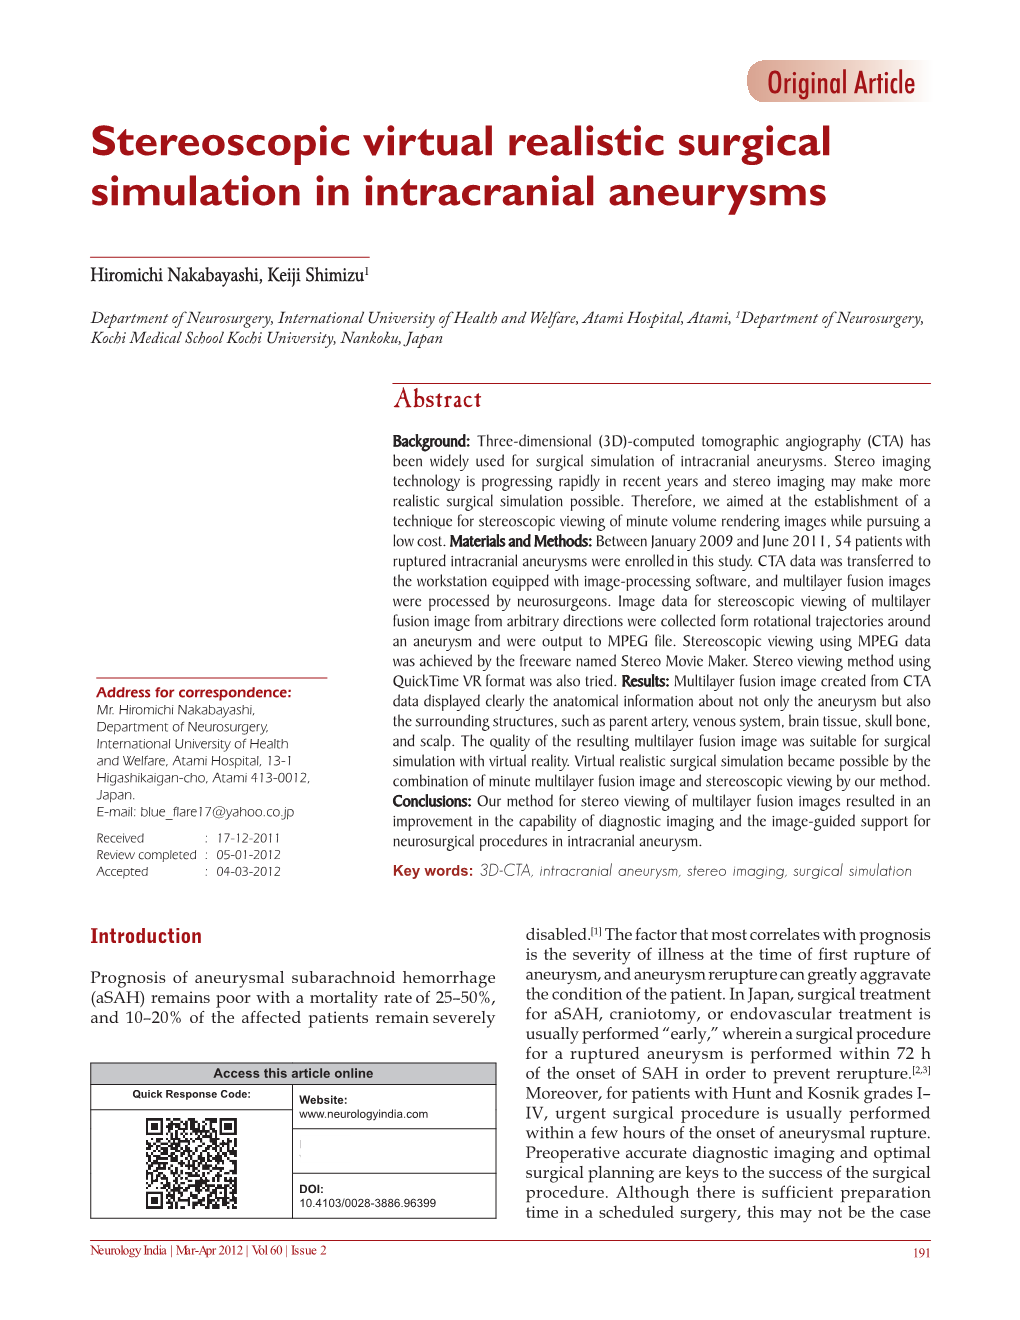 Stereoscopic Virtual Realistic Surgical Simulation in Intracranial Aneurysms